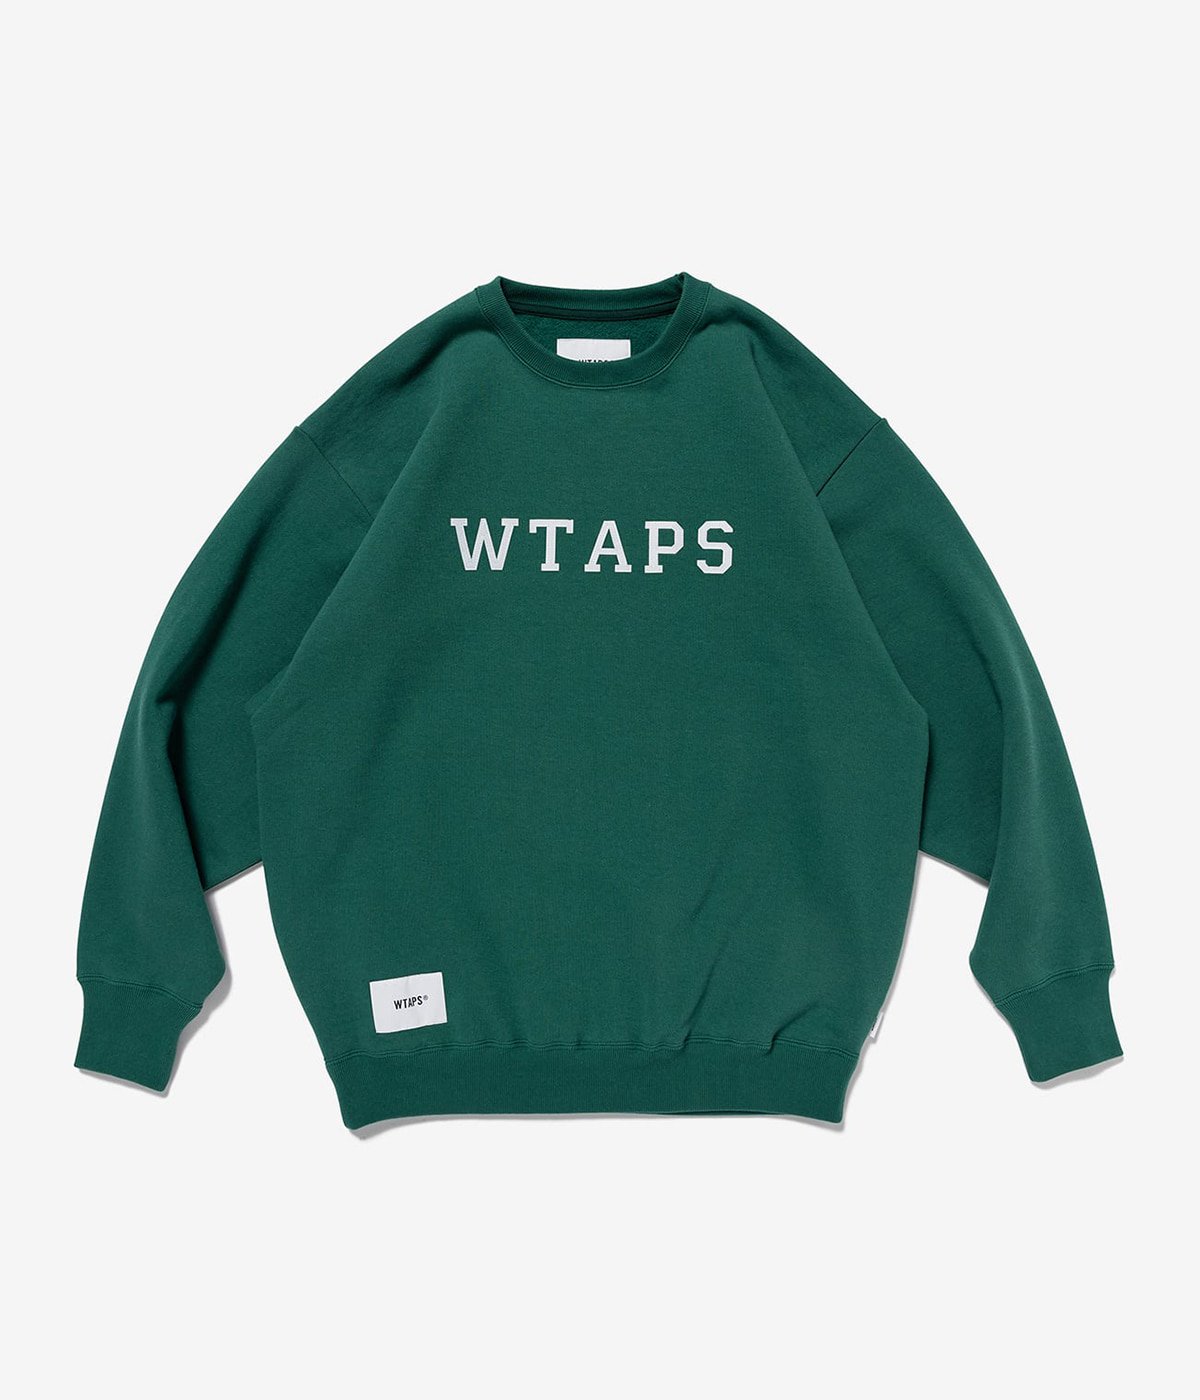 ACADEMY / SWEATER / COTTON. COLLEGE | WTAPS(ダブルタップス ...